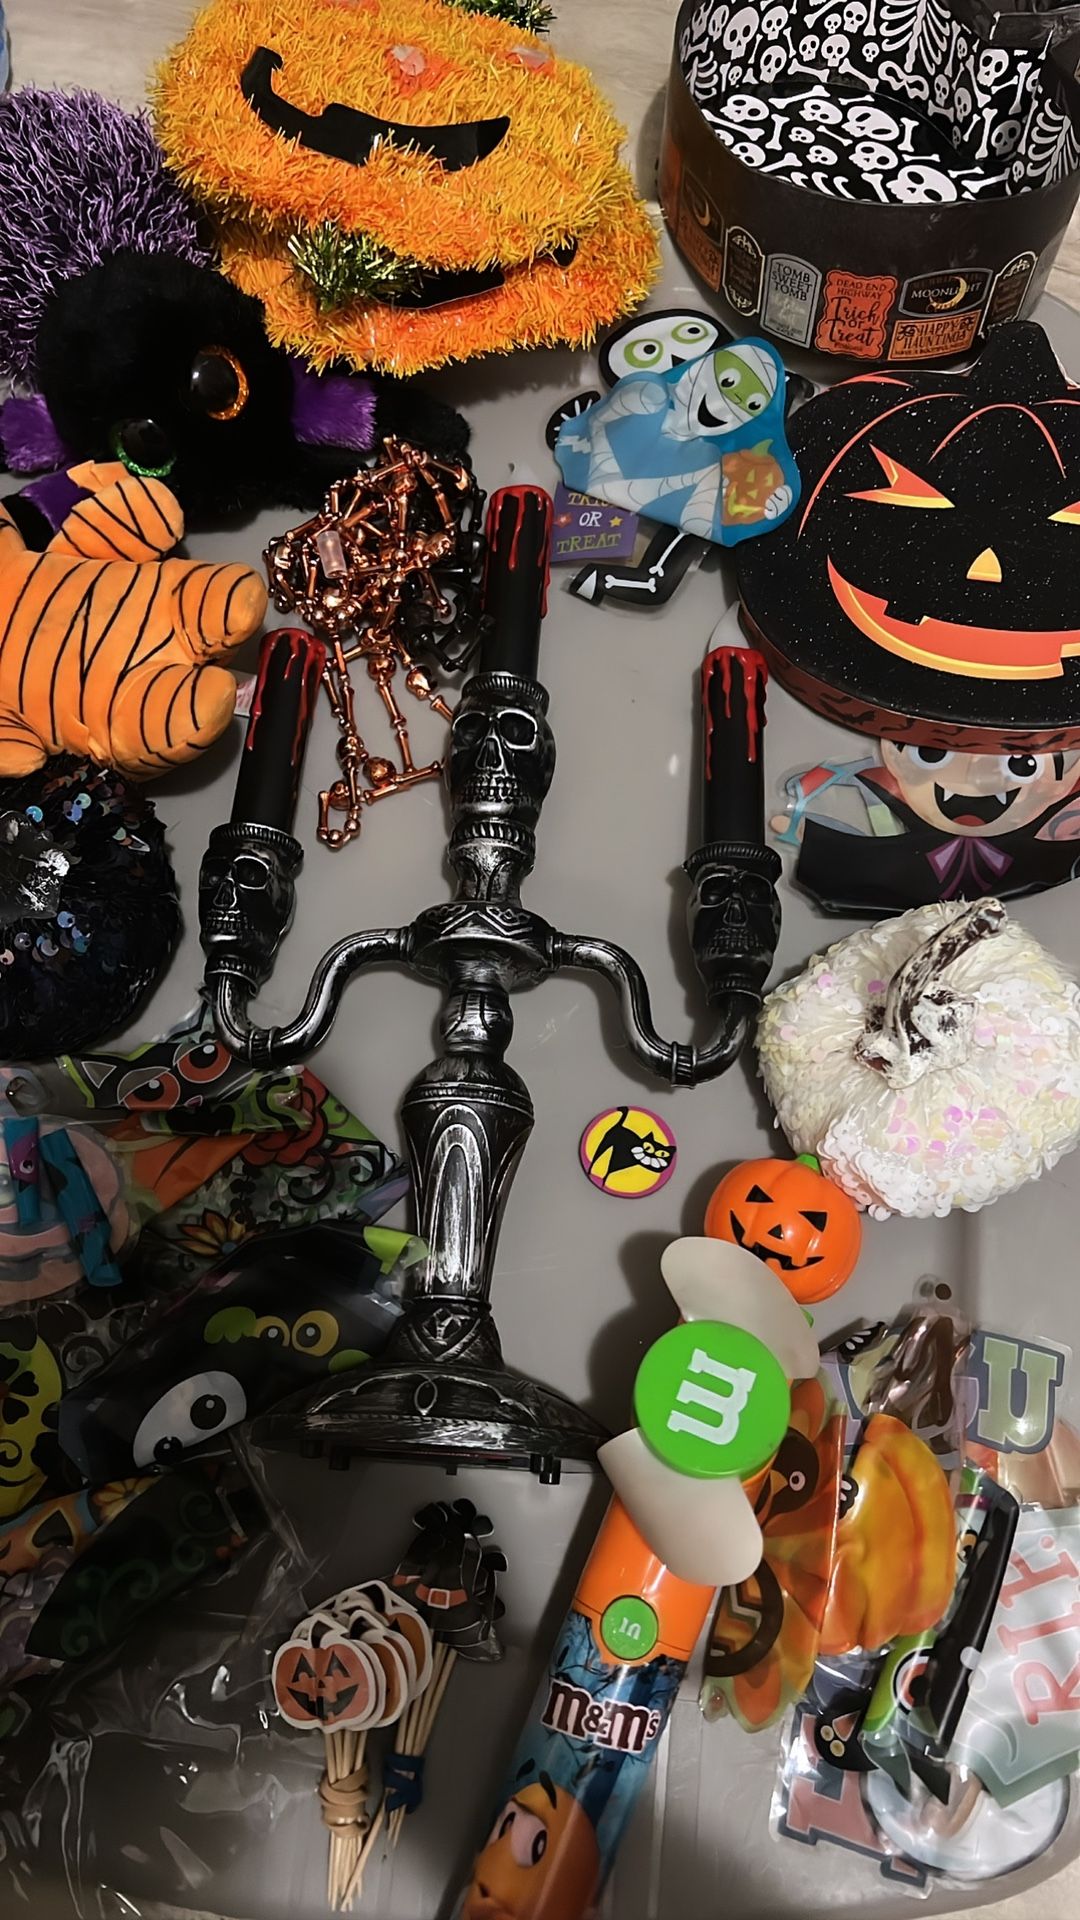  Bundle  $9 Todo ! All!! Halloween everything decorations